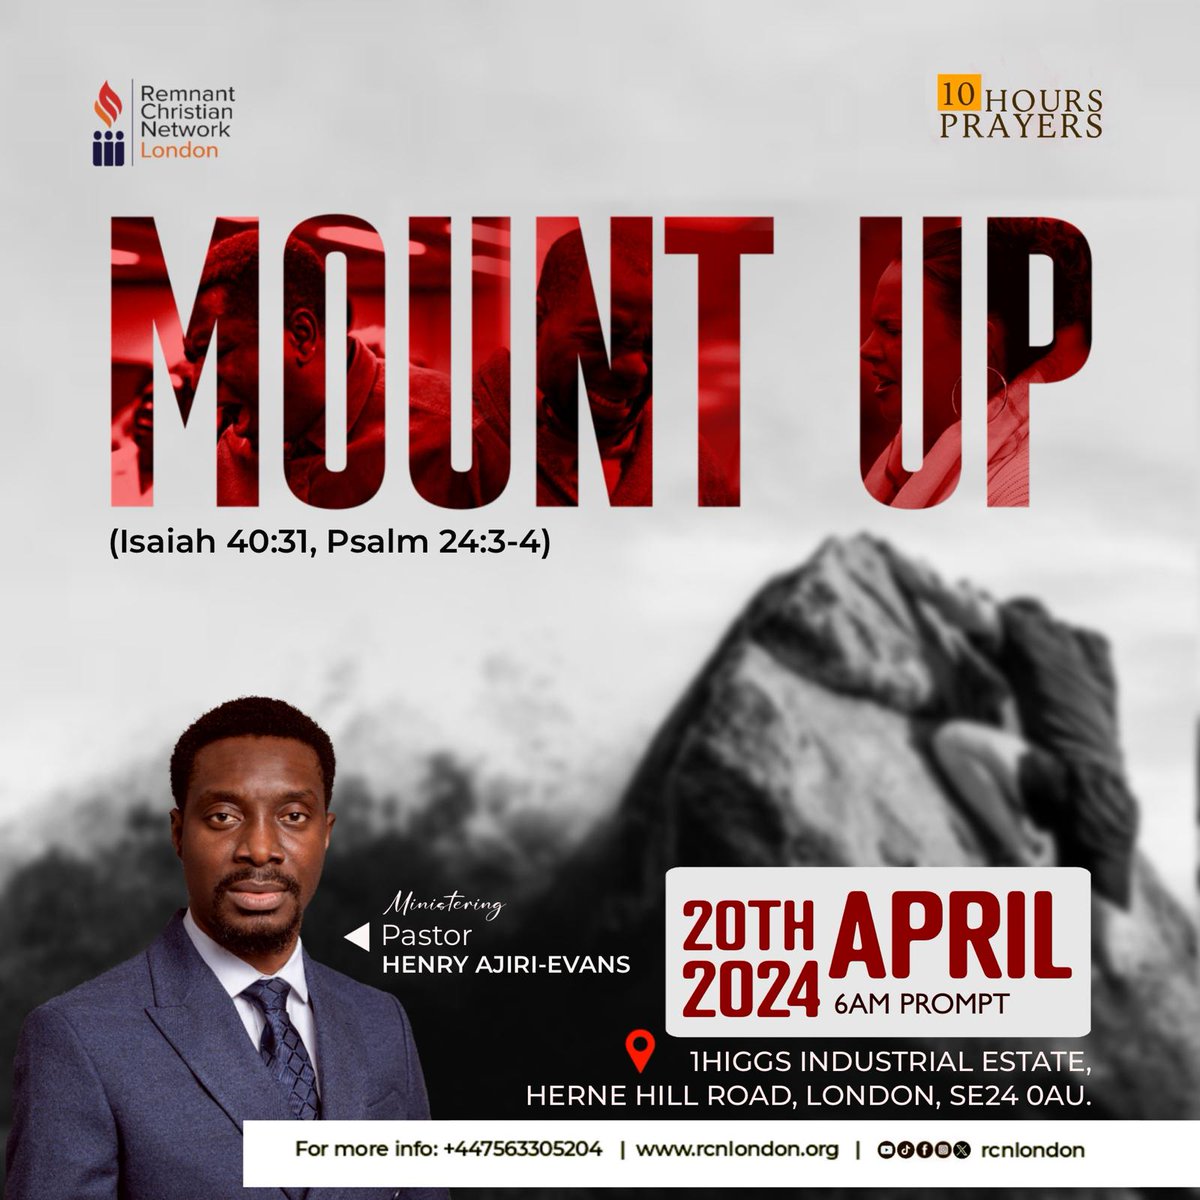 2 DAYS TO GO!! Have you invited a friend? #MountUp #10HoursPrayers #RCNLondon